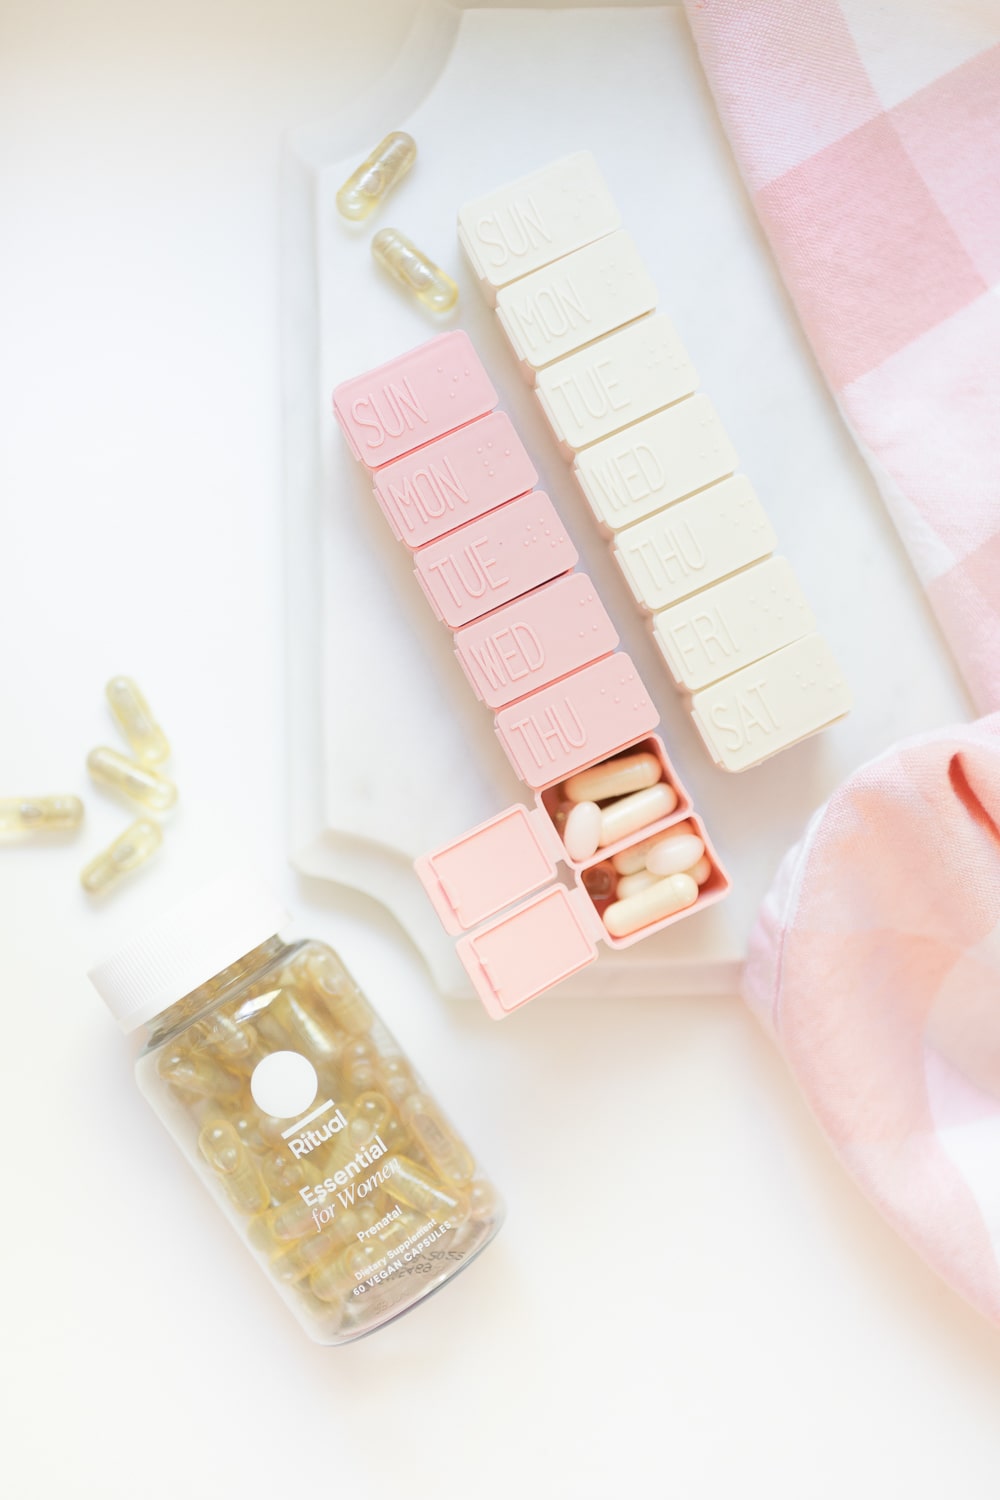 Ritual vitamins review from blogger Stephanie Ziajka on Diary of a Debutante